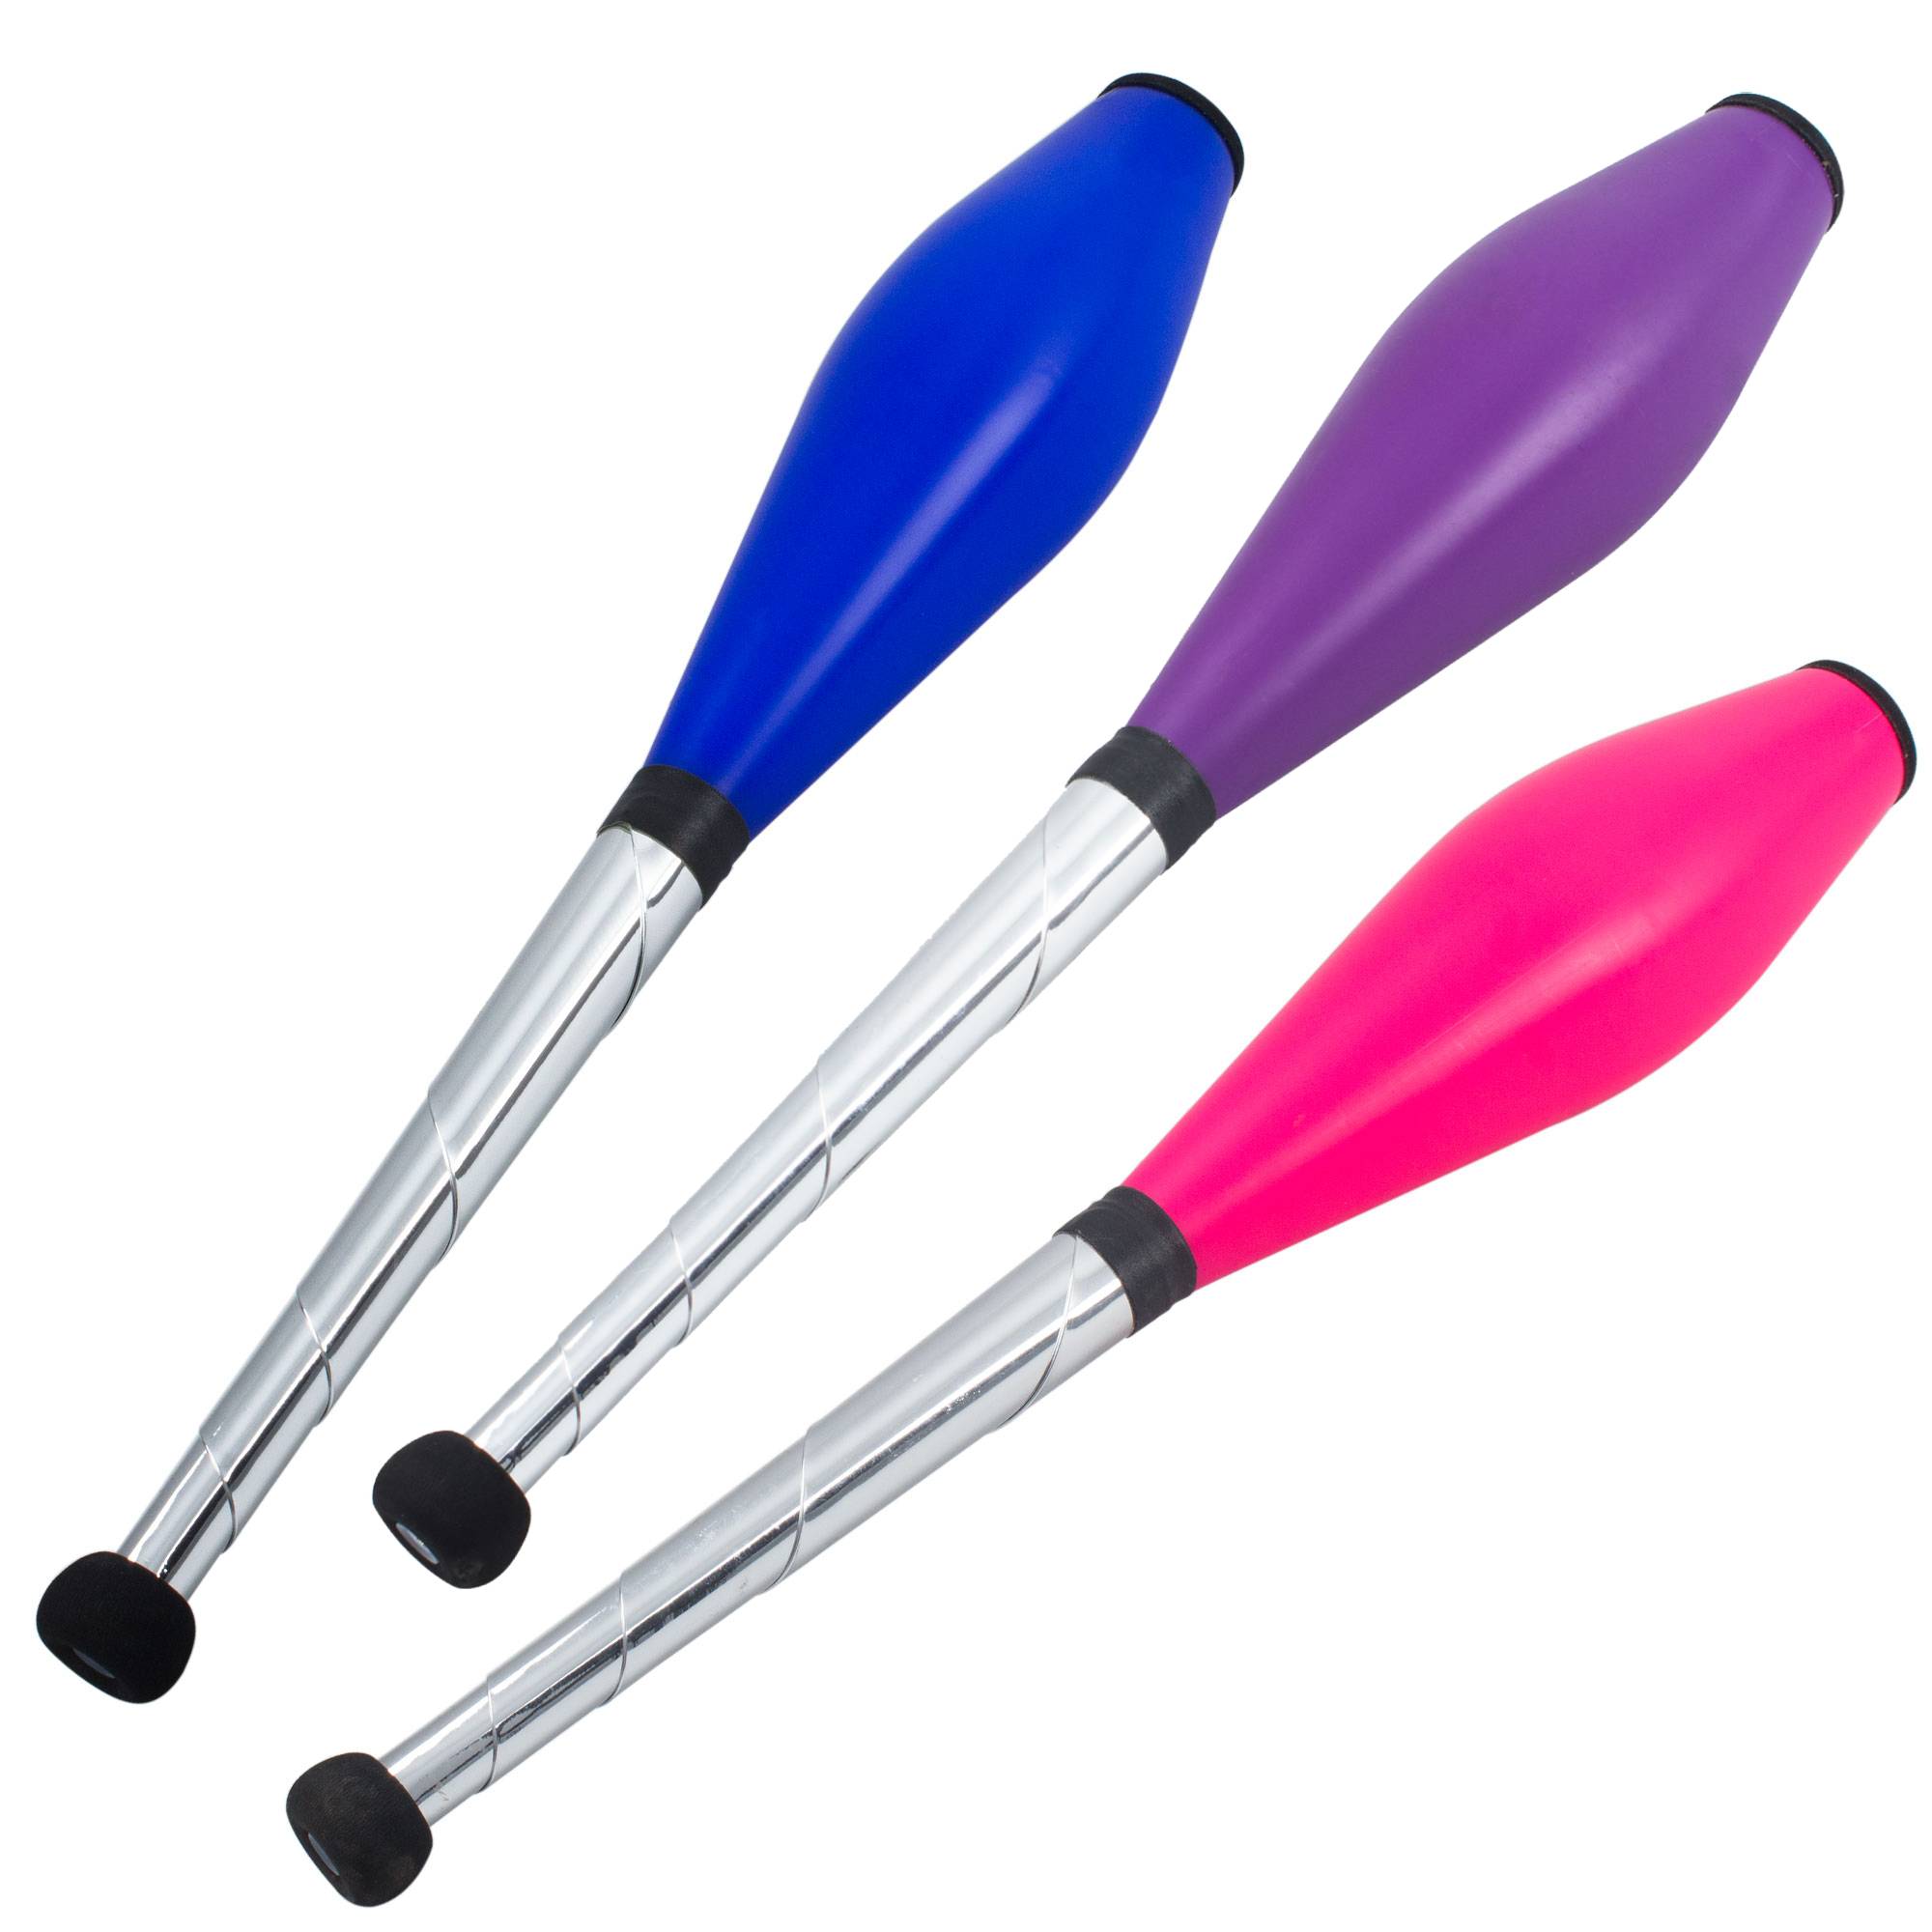 Blue, purple and pink pirouette clubs